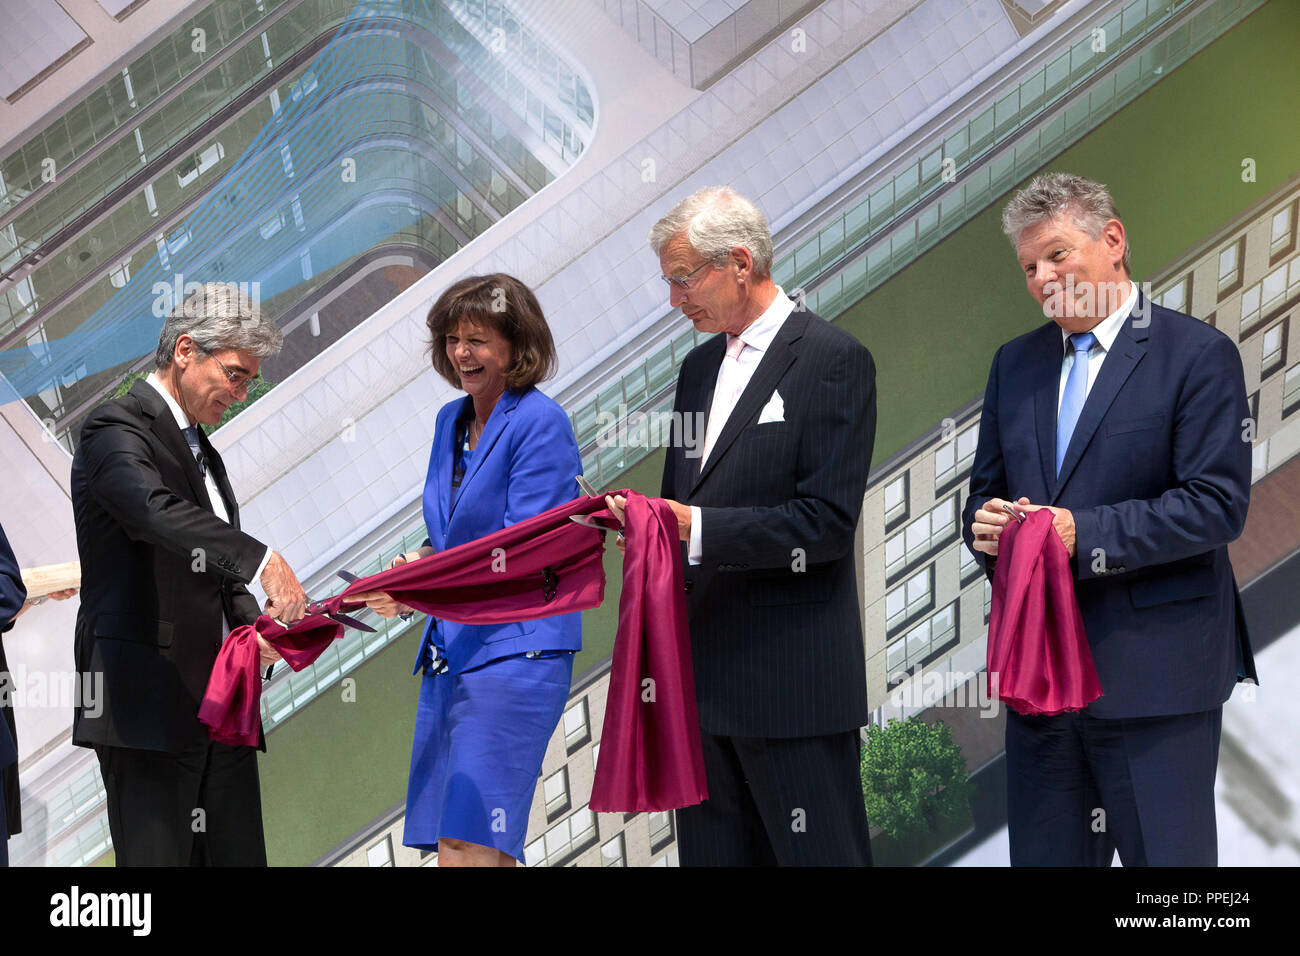 Siemens CEO Joe Kaeser, Minister of Economic Affairs Ilse Aigner, Chairman  Gerhard Cromme and Munich's Lord Mayor Dieter Reiter at the opening of the  Siemens headquarters at Wittelsbacher Platz in Munich Stock